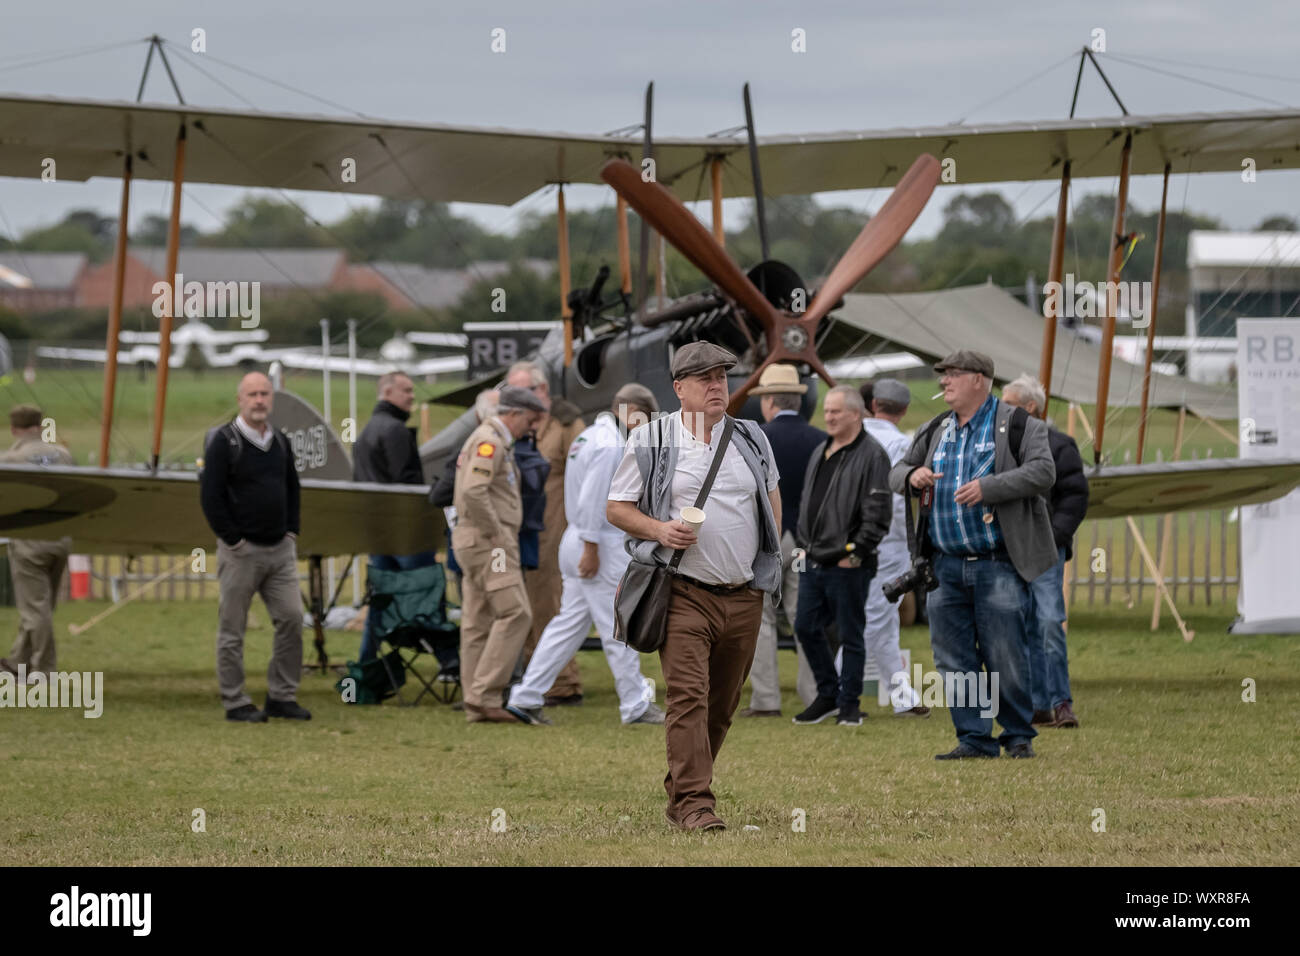 Royal Aircraft Factory BE2 British single-engine tractor two-seat biplane on display at the Goodwood Revival classic car show. Stock Photo